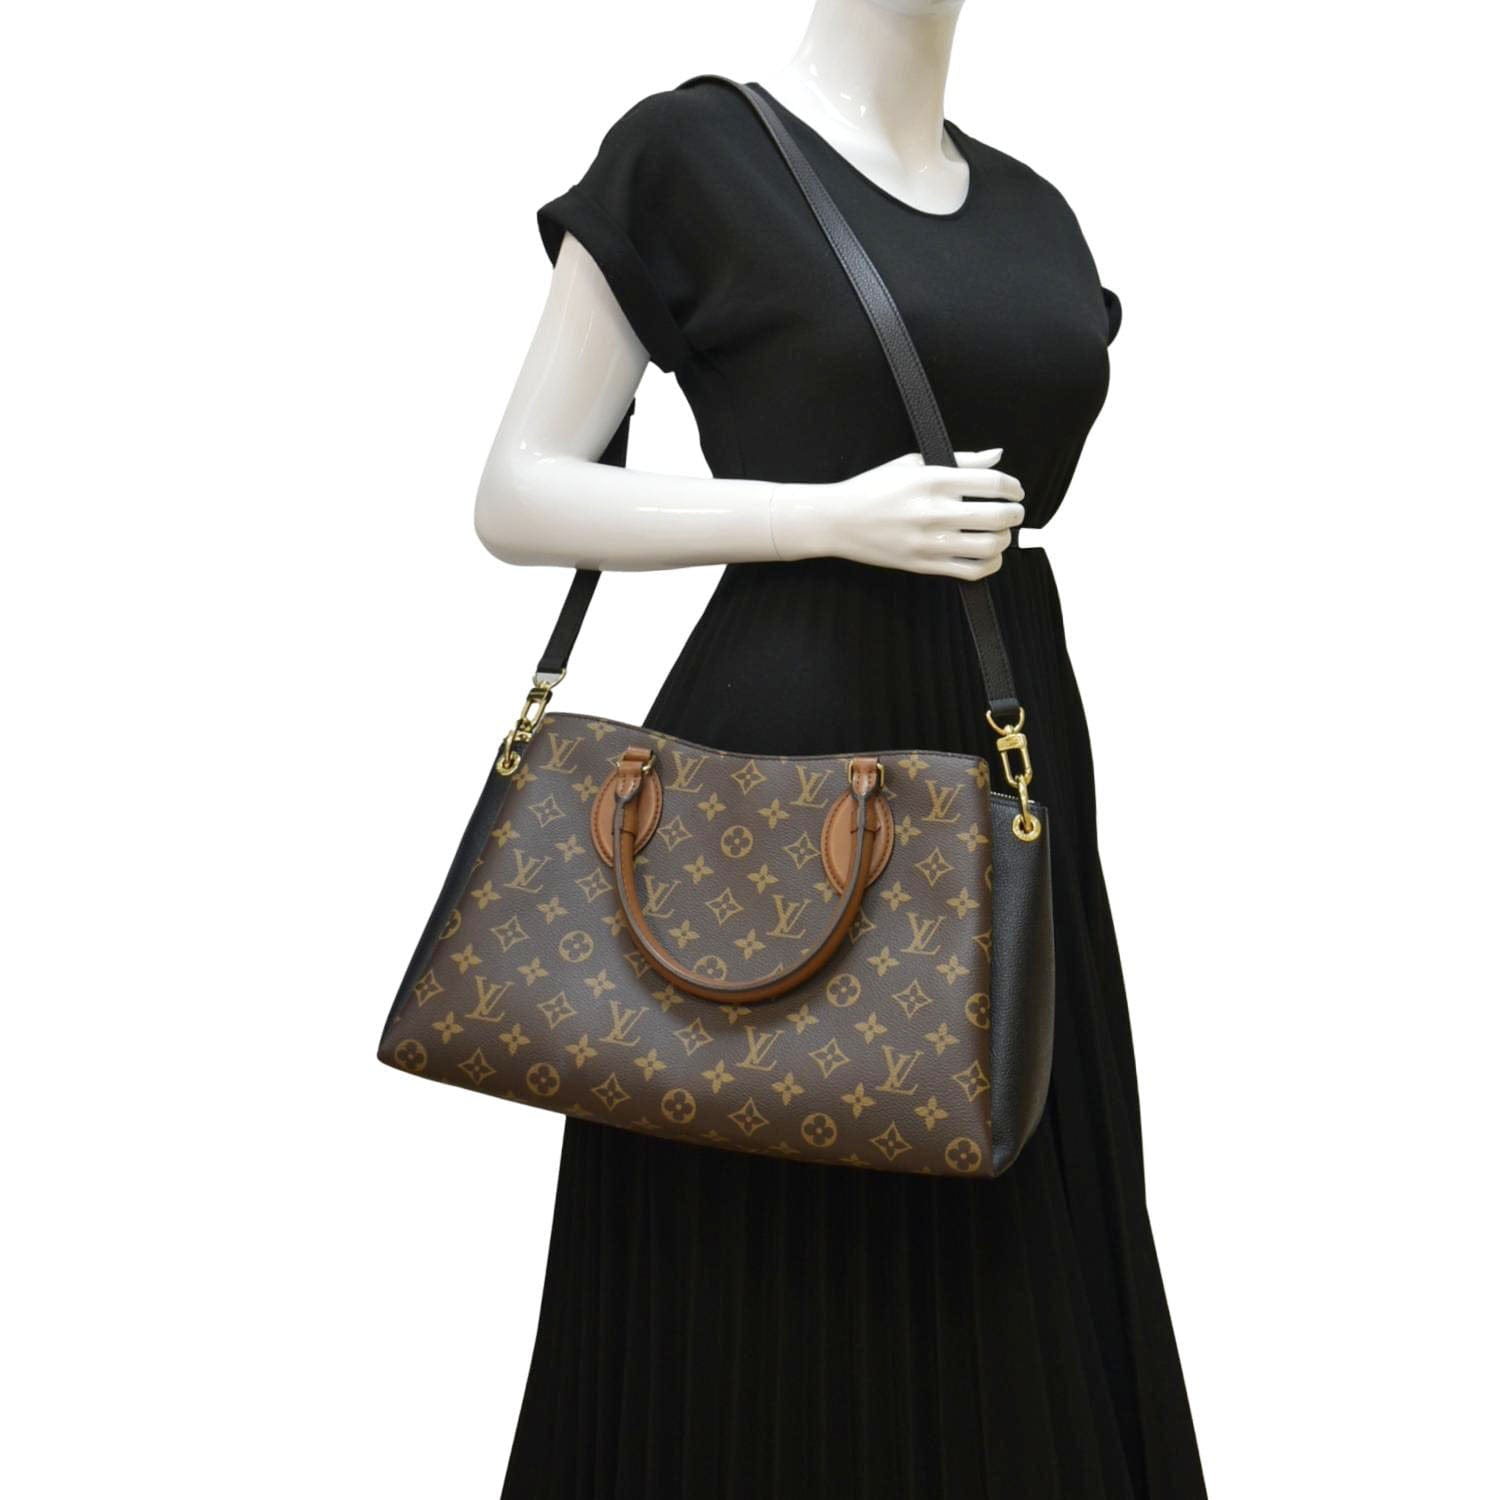 Vintage Louis Vuitton Alma Bag - Iconic Elegance and Timeless Style